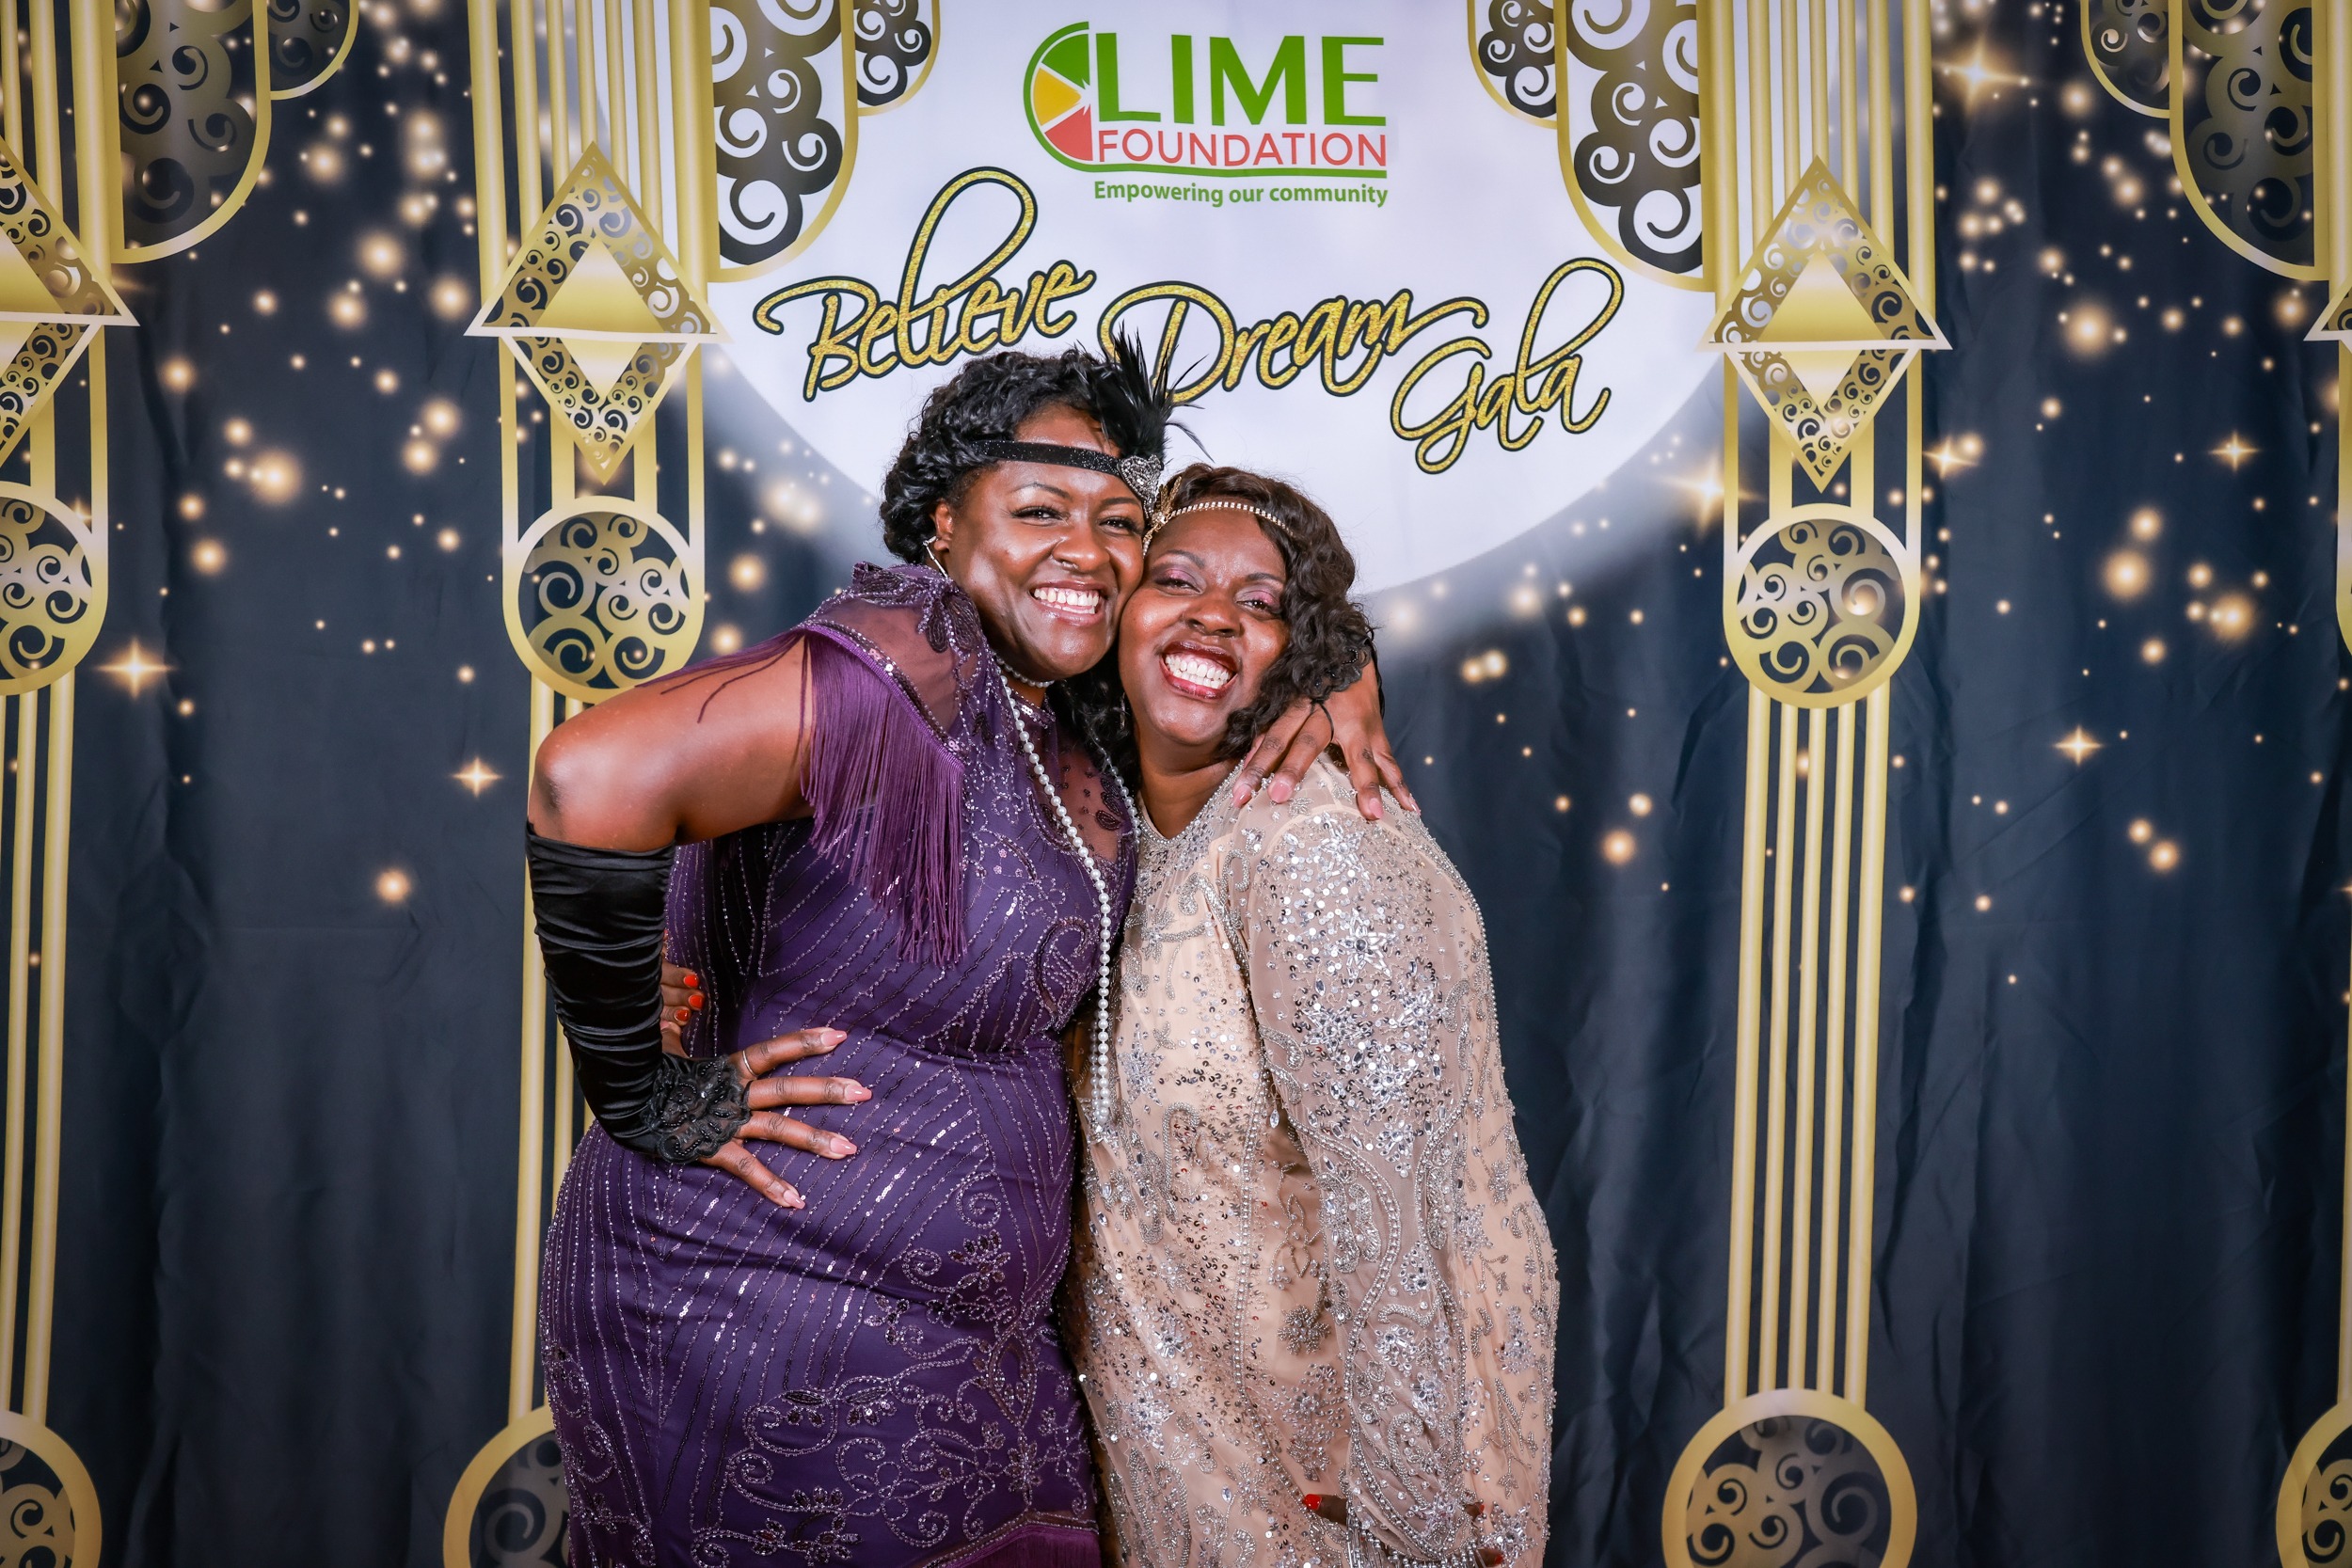 Two women posing for a photo at a 1920's themed party organized by The LIME Foundation of Santa Rosa.